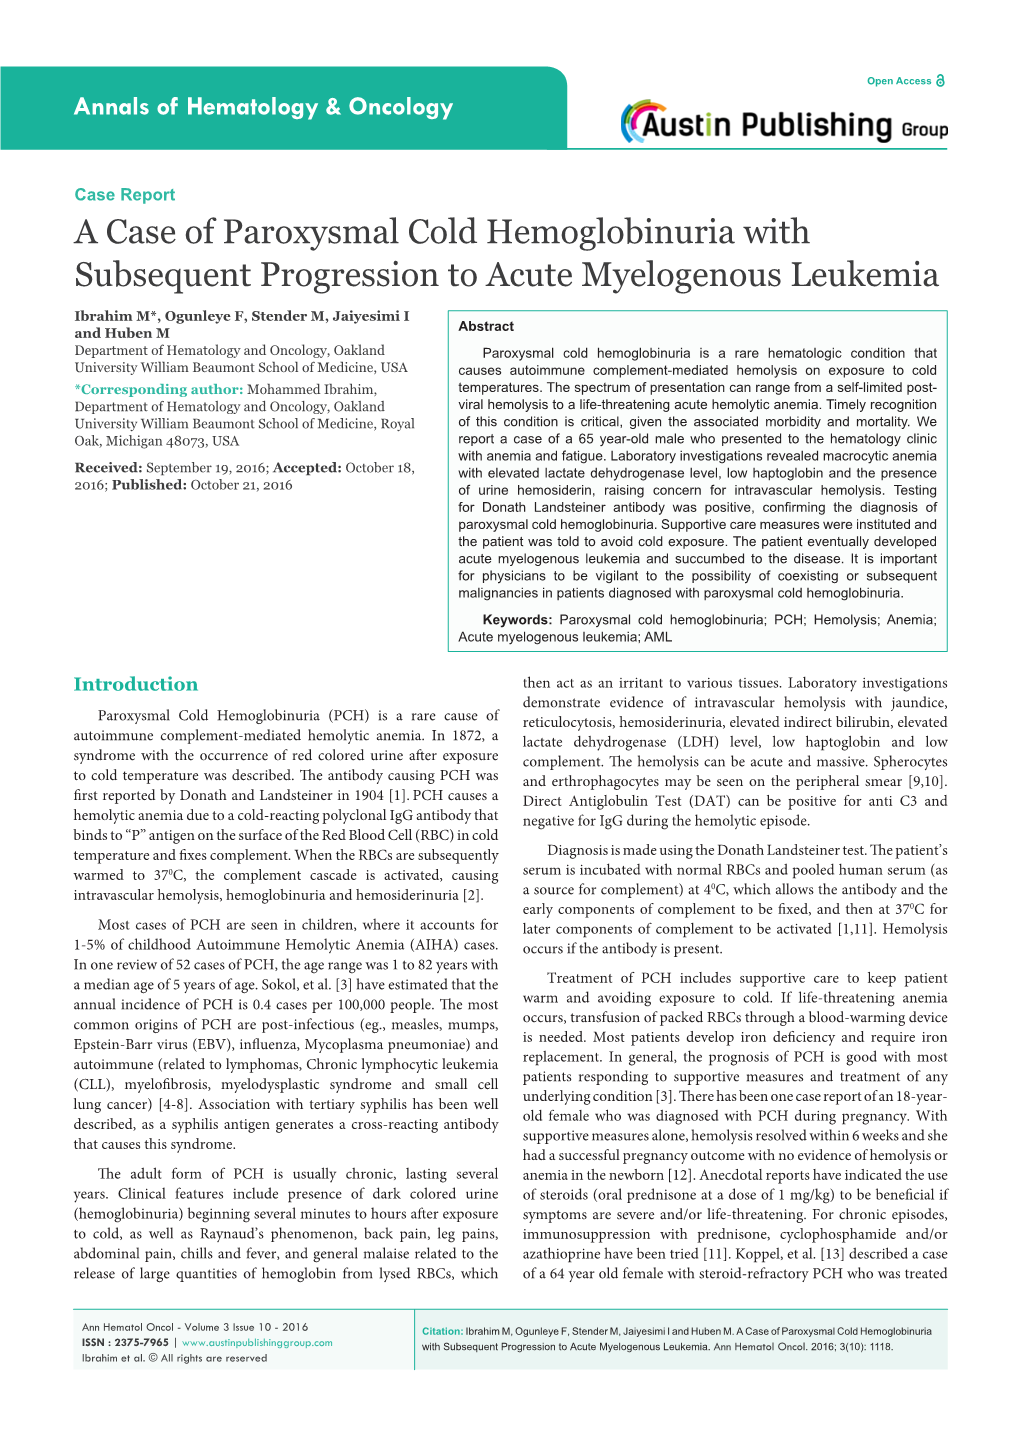 A Case of Paroxysmal Cold Hemoglobinuria with Subsequent Progression to Acute Myelogenous Leukemia